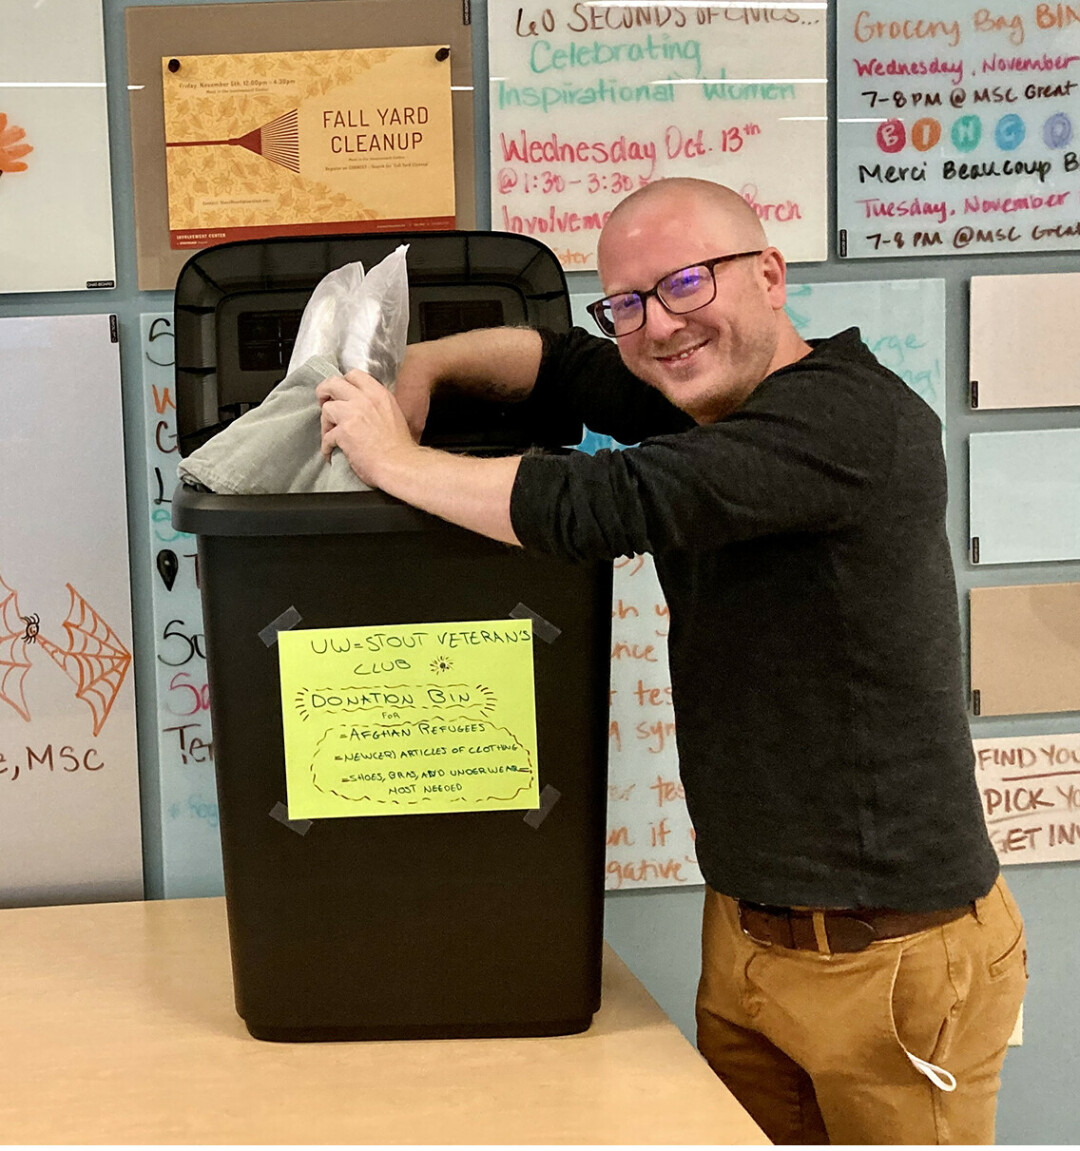 Veterans Club President Eric Gritzmacher collects items donated to help Afghan evacuees at one of two bins in the UW-Stout Memorial Student Center. The university Veterans Club is sponsoring the drive to collect new or like new clothing until Monday, Nov. 8.